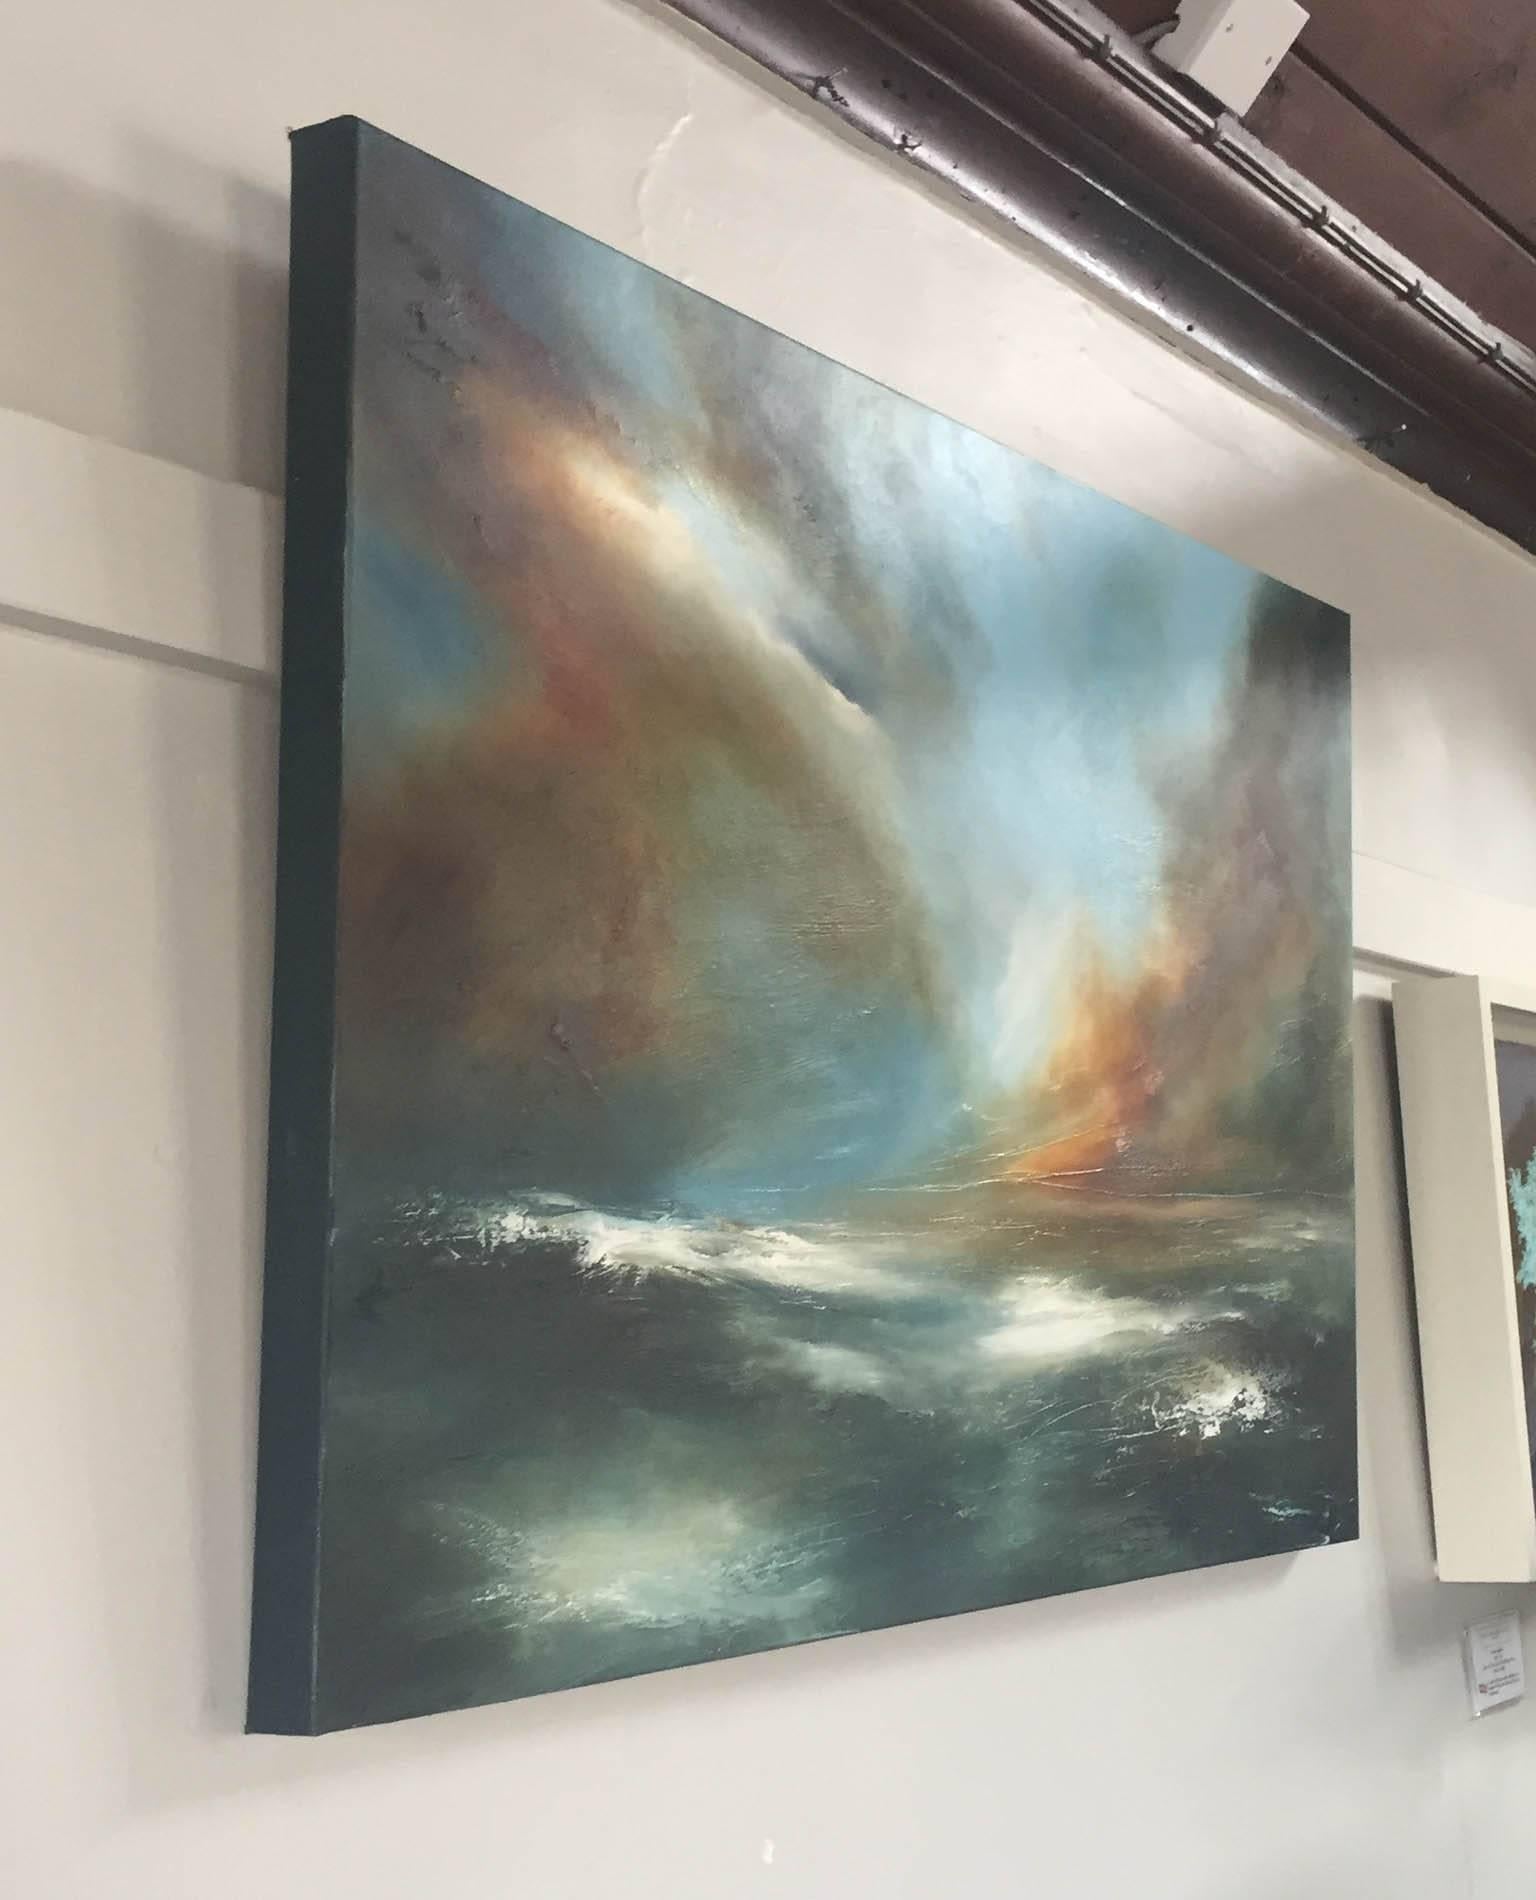 'In her wake' is an original, oil on canvas seascape painting by Helen Langfield.

This piece has been painted on a boxed canvas, with the sides painted in a block colour, to enhance the painting and complete the work with a clean contemporary